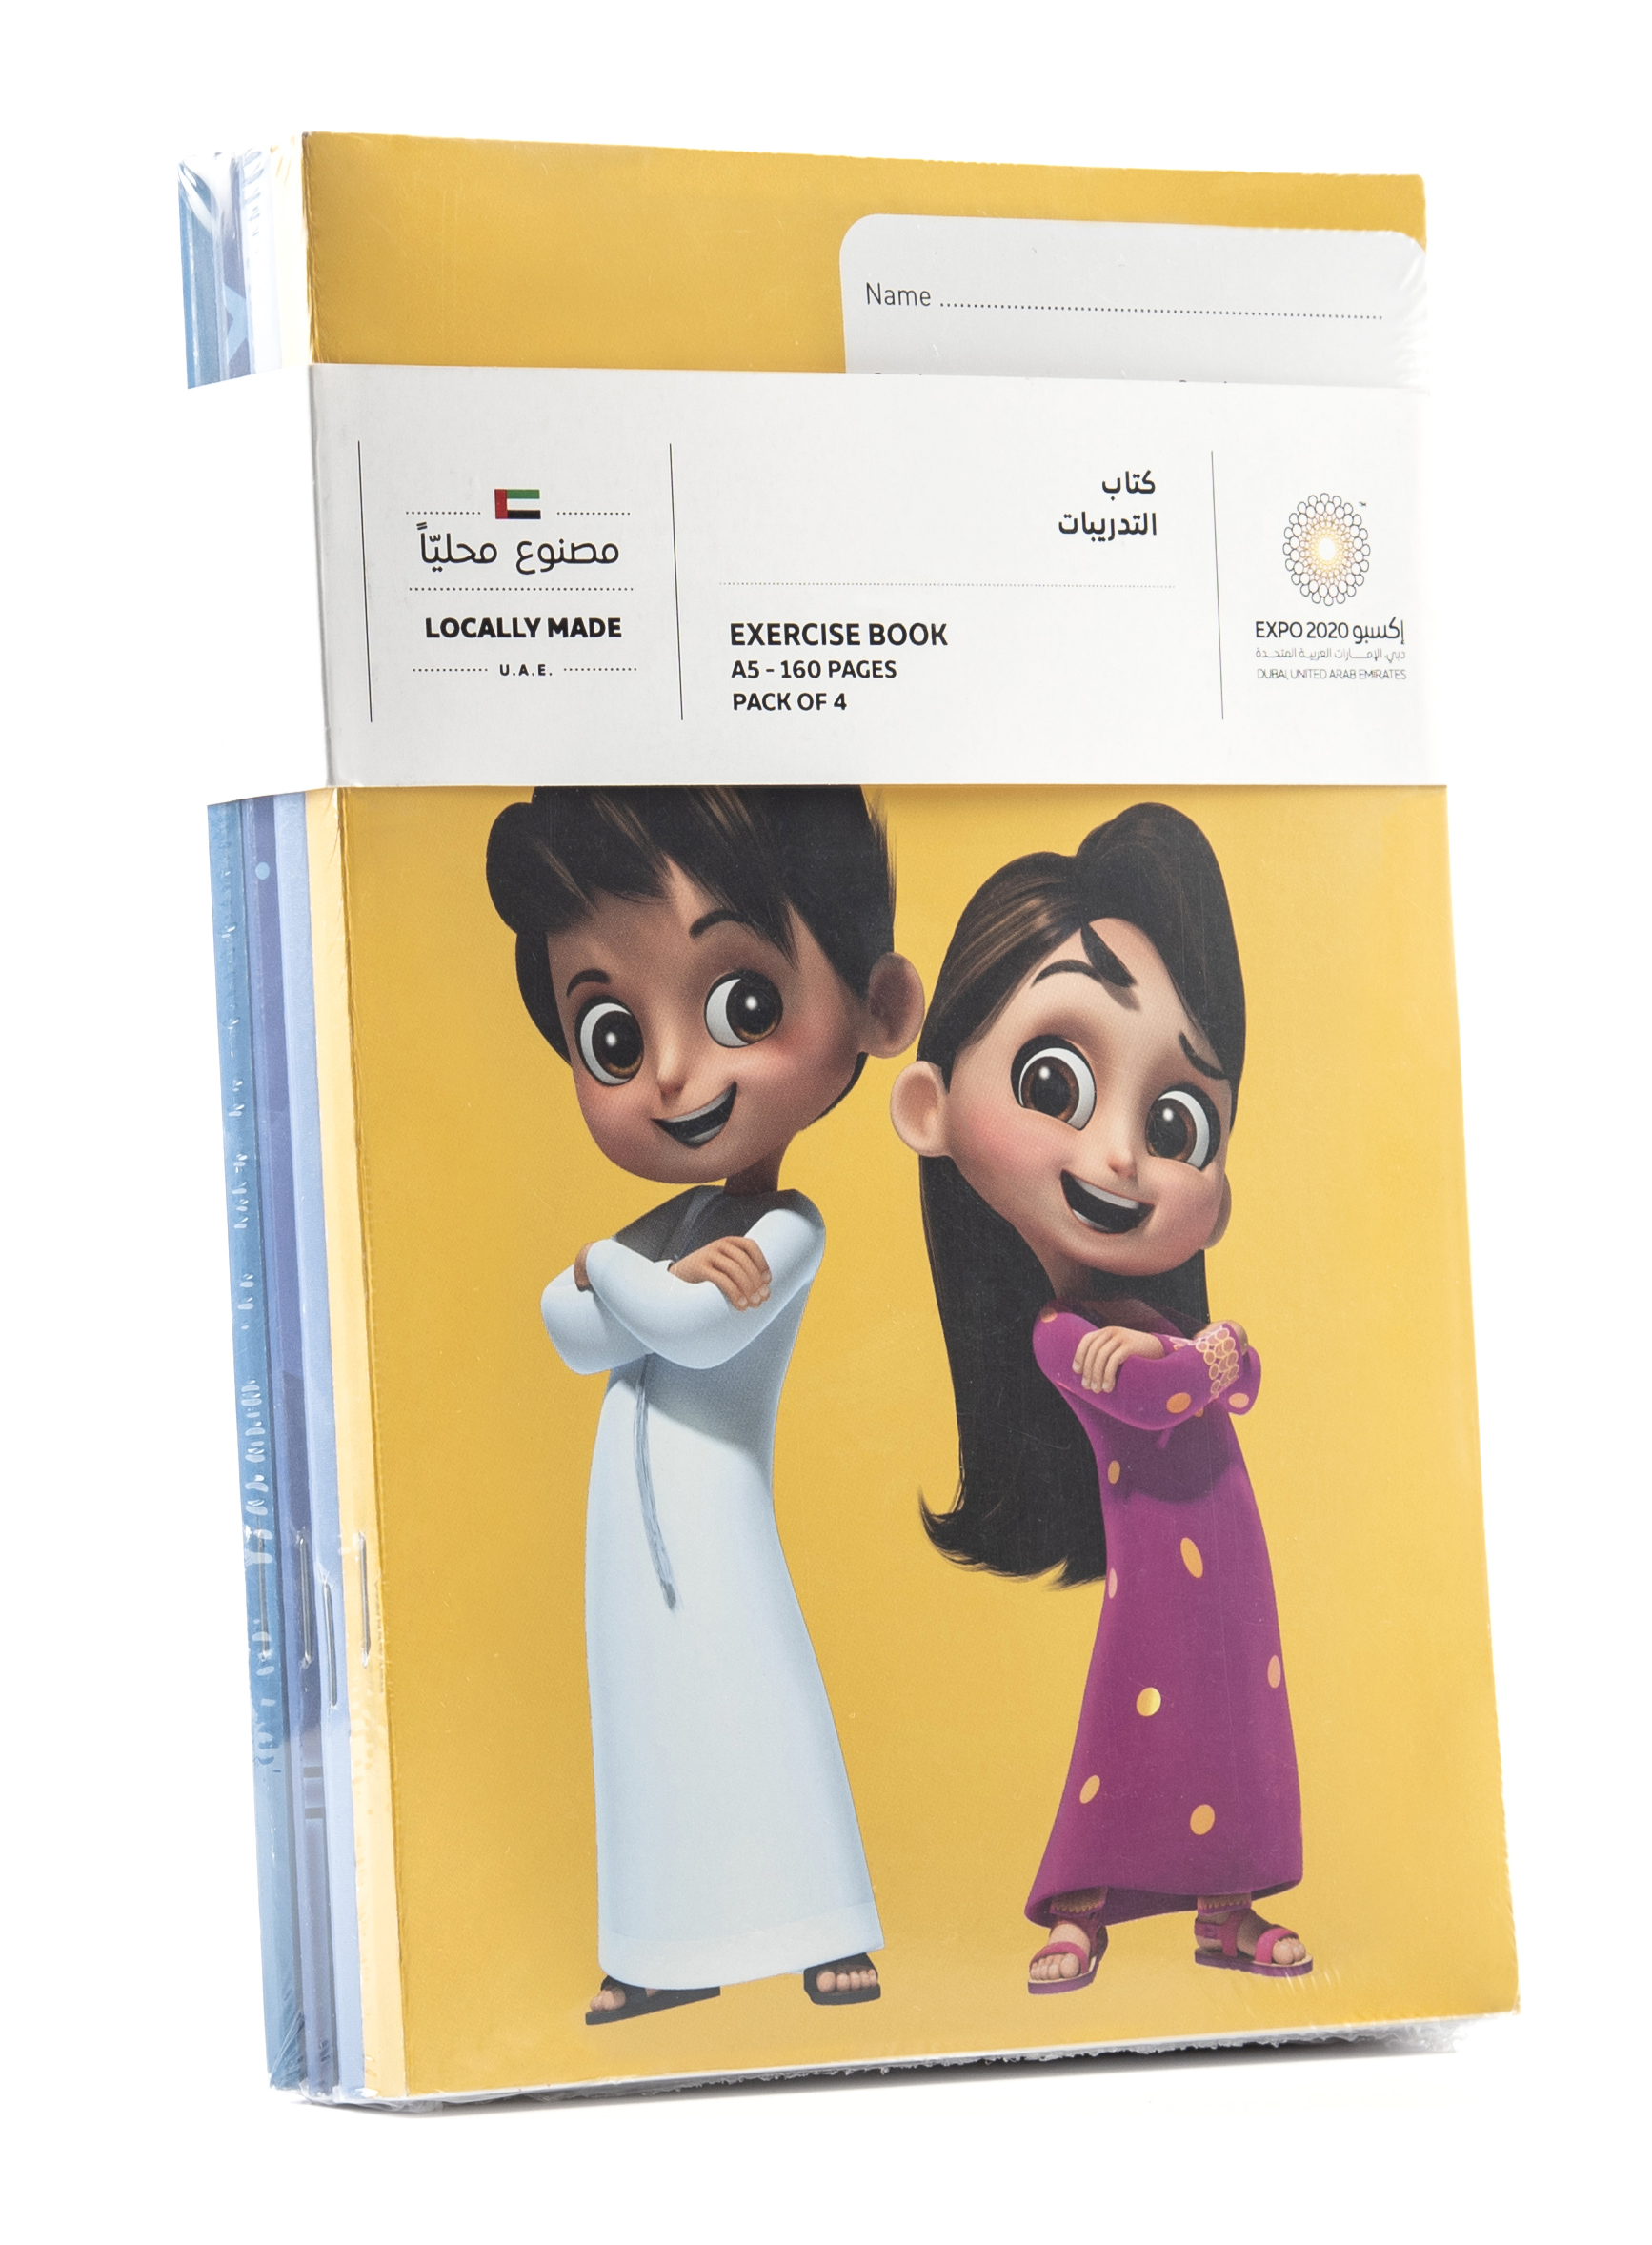 Expo 2020 Dubai Mascots A5 Exercise Books Pack of 4 - 160 Pages